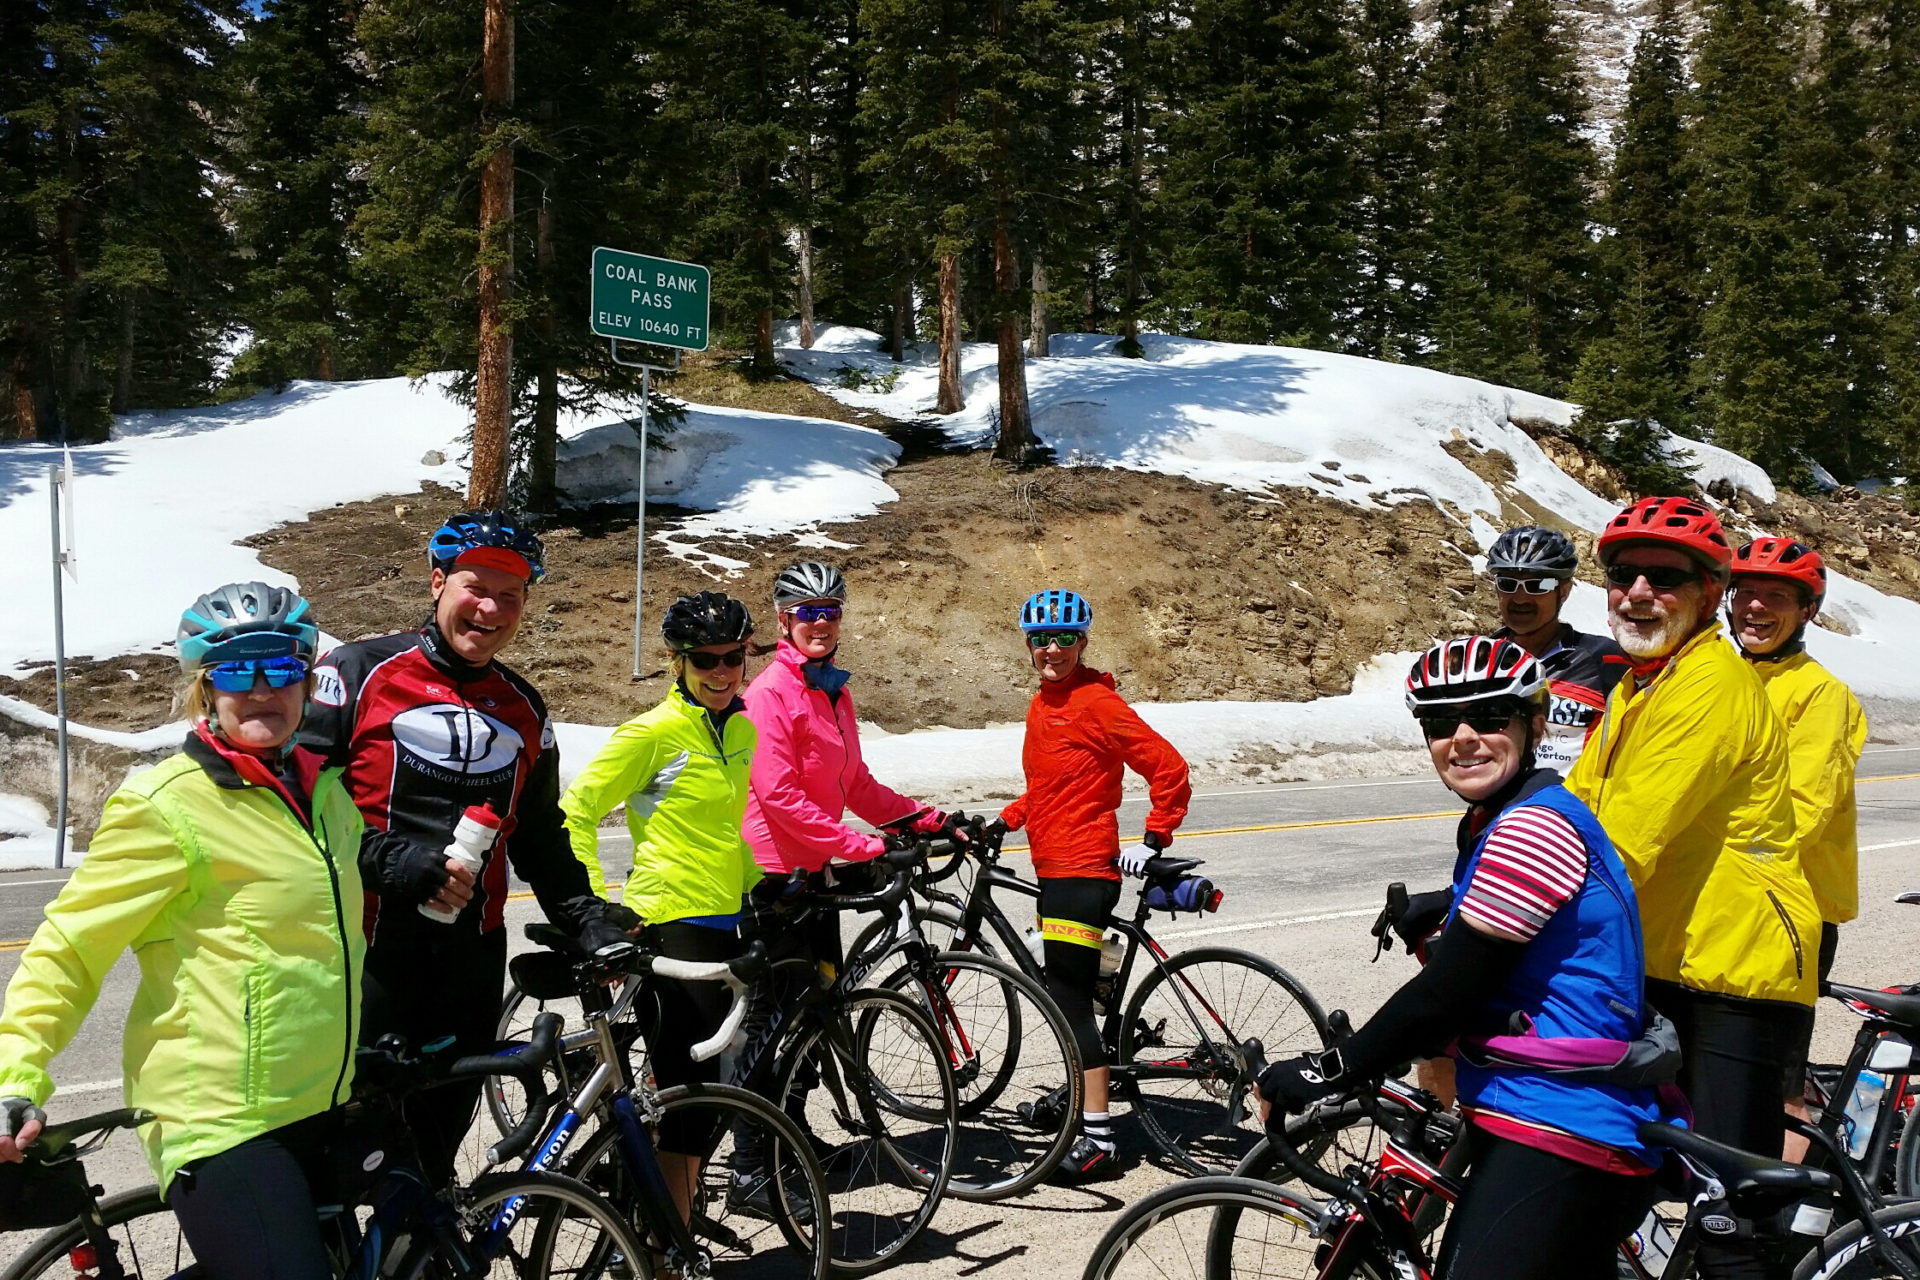 Nine people stand with their bikes on a mountain road.